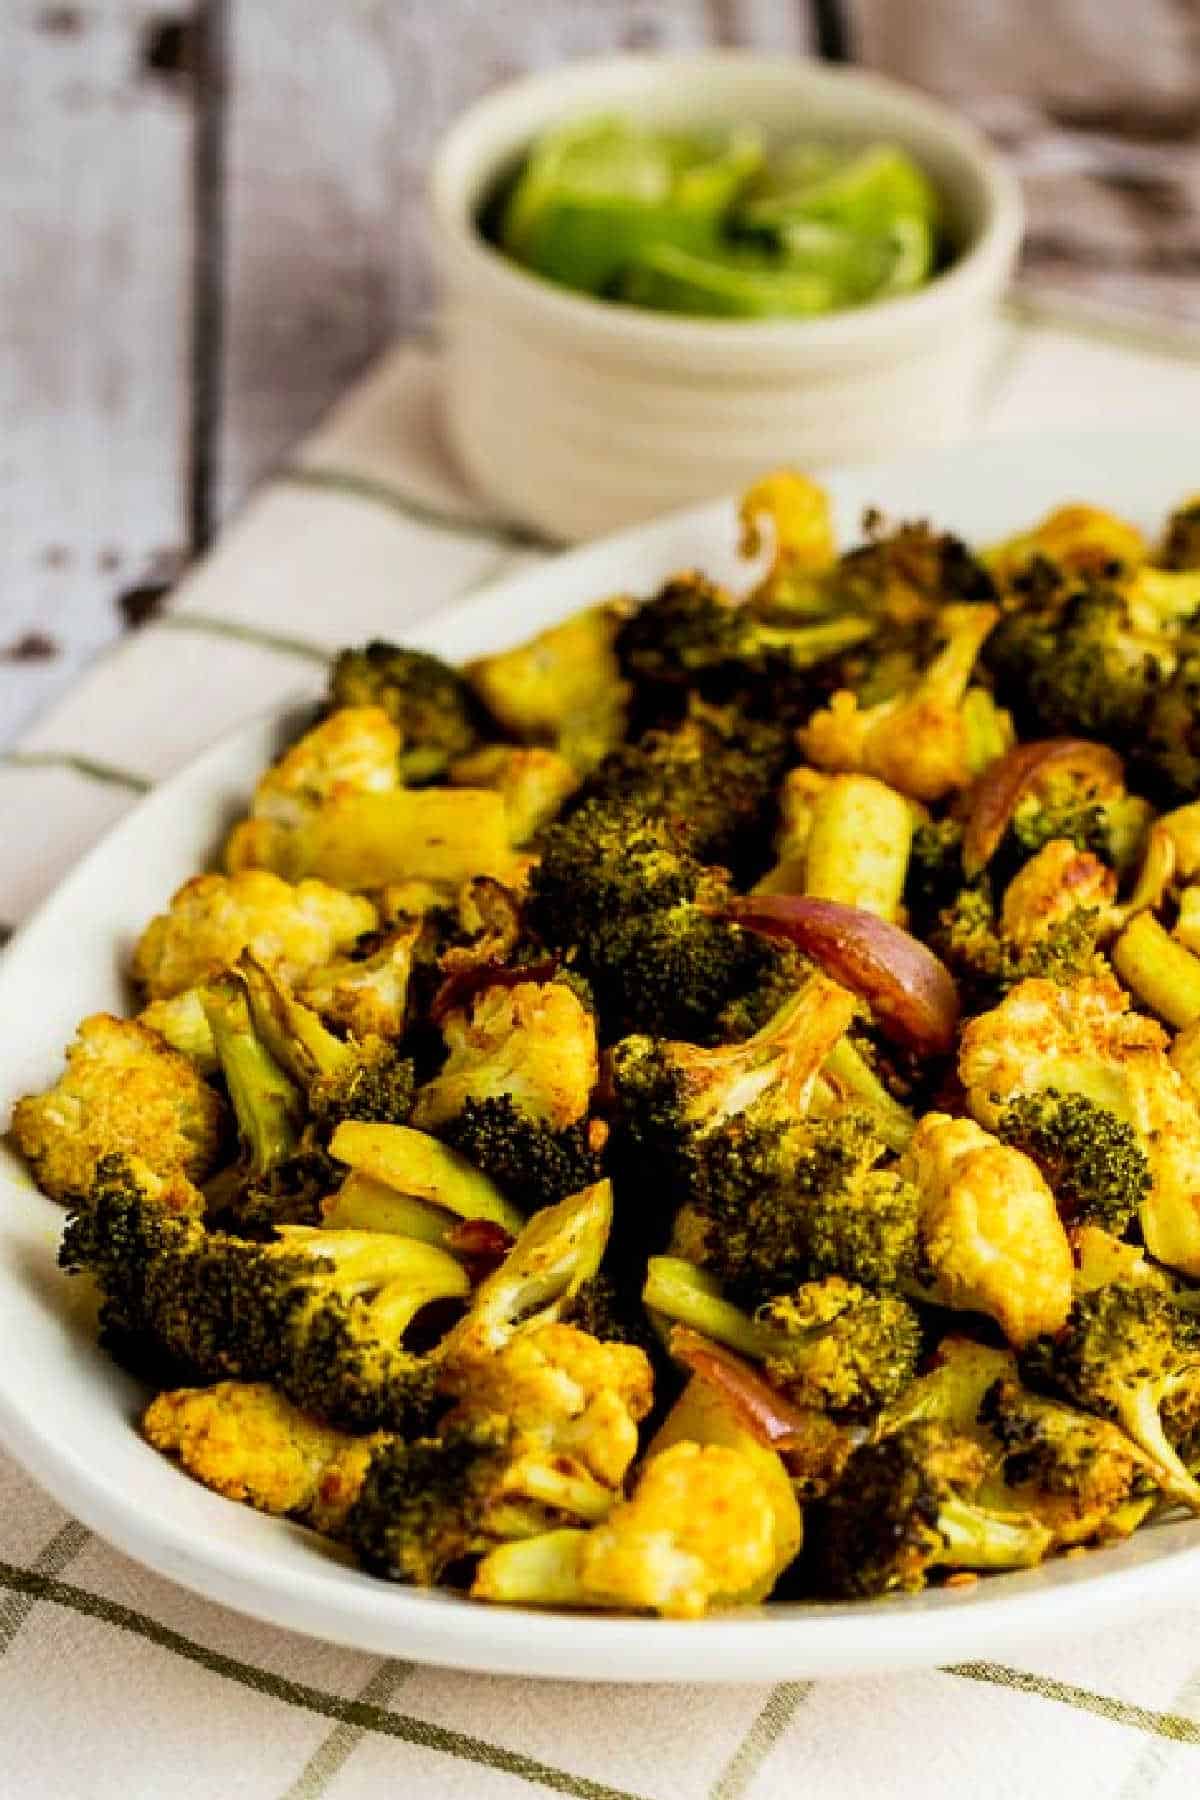 Roasted Broccoli and Cauliflower shown on serving plate with limes in background